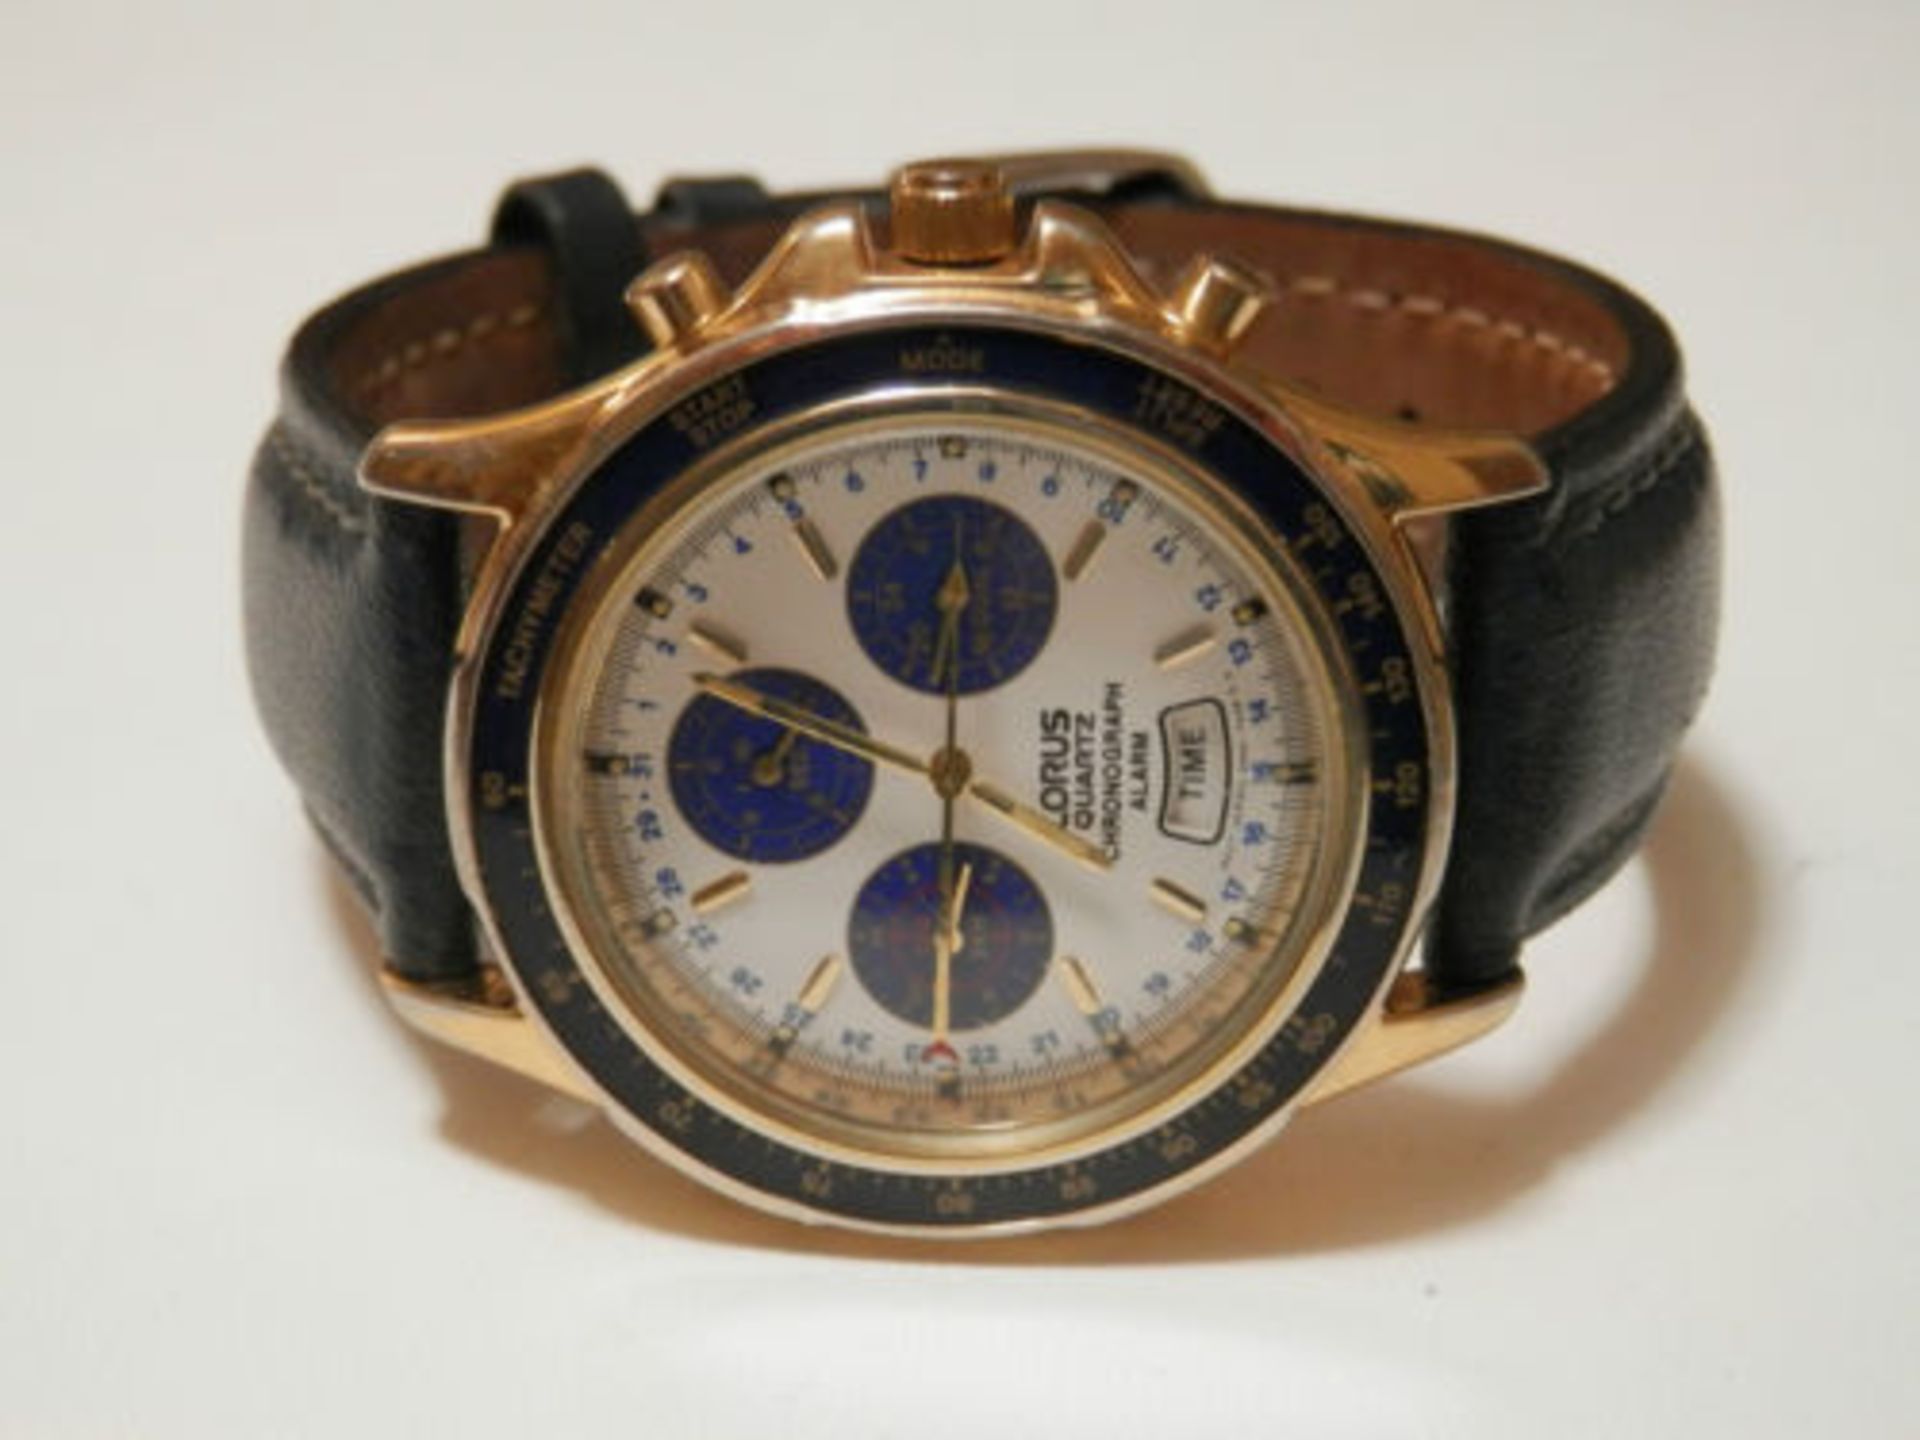 RETRO GENTS LORUS 1990S MINI DIAL CHRONOGRAPH, ALARM, DATE WATCH. KEEPING TIME. - Image 2 of 11